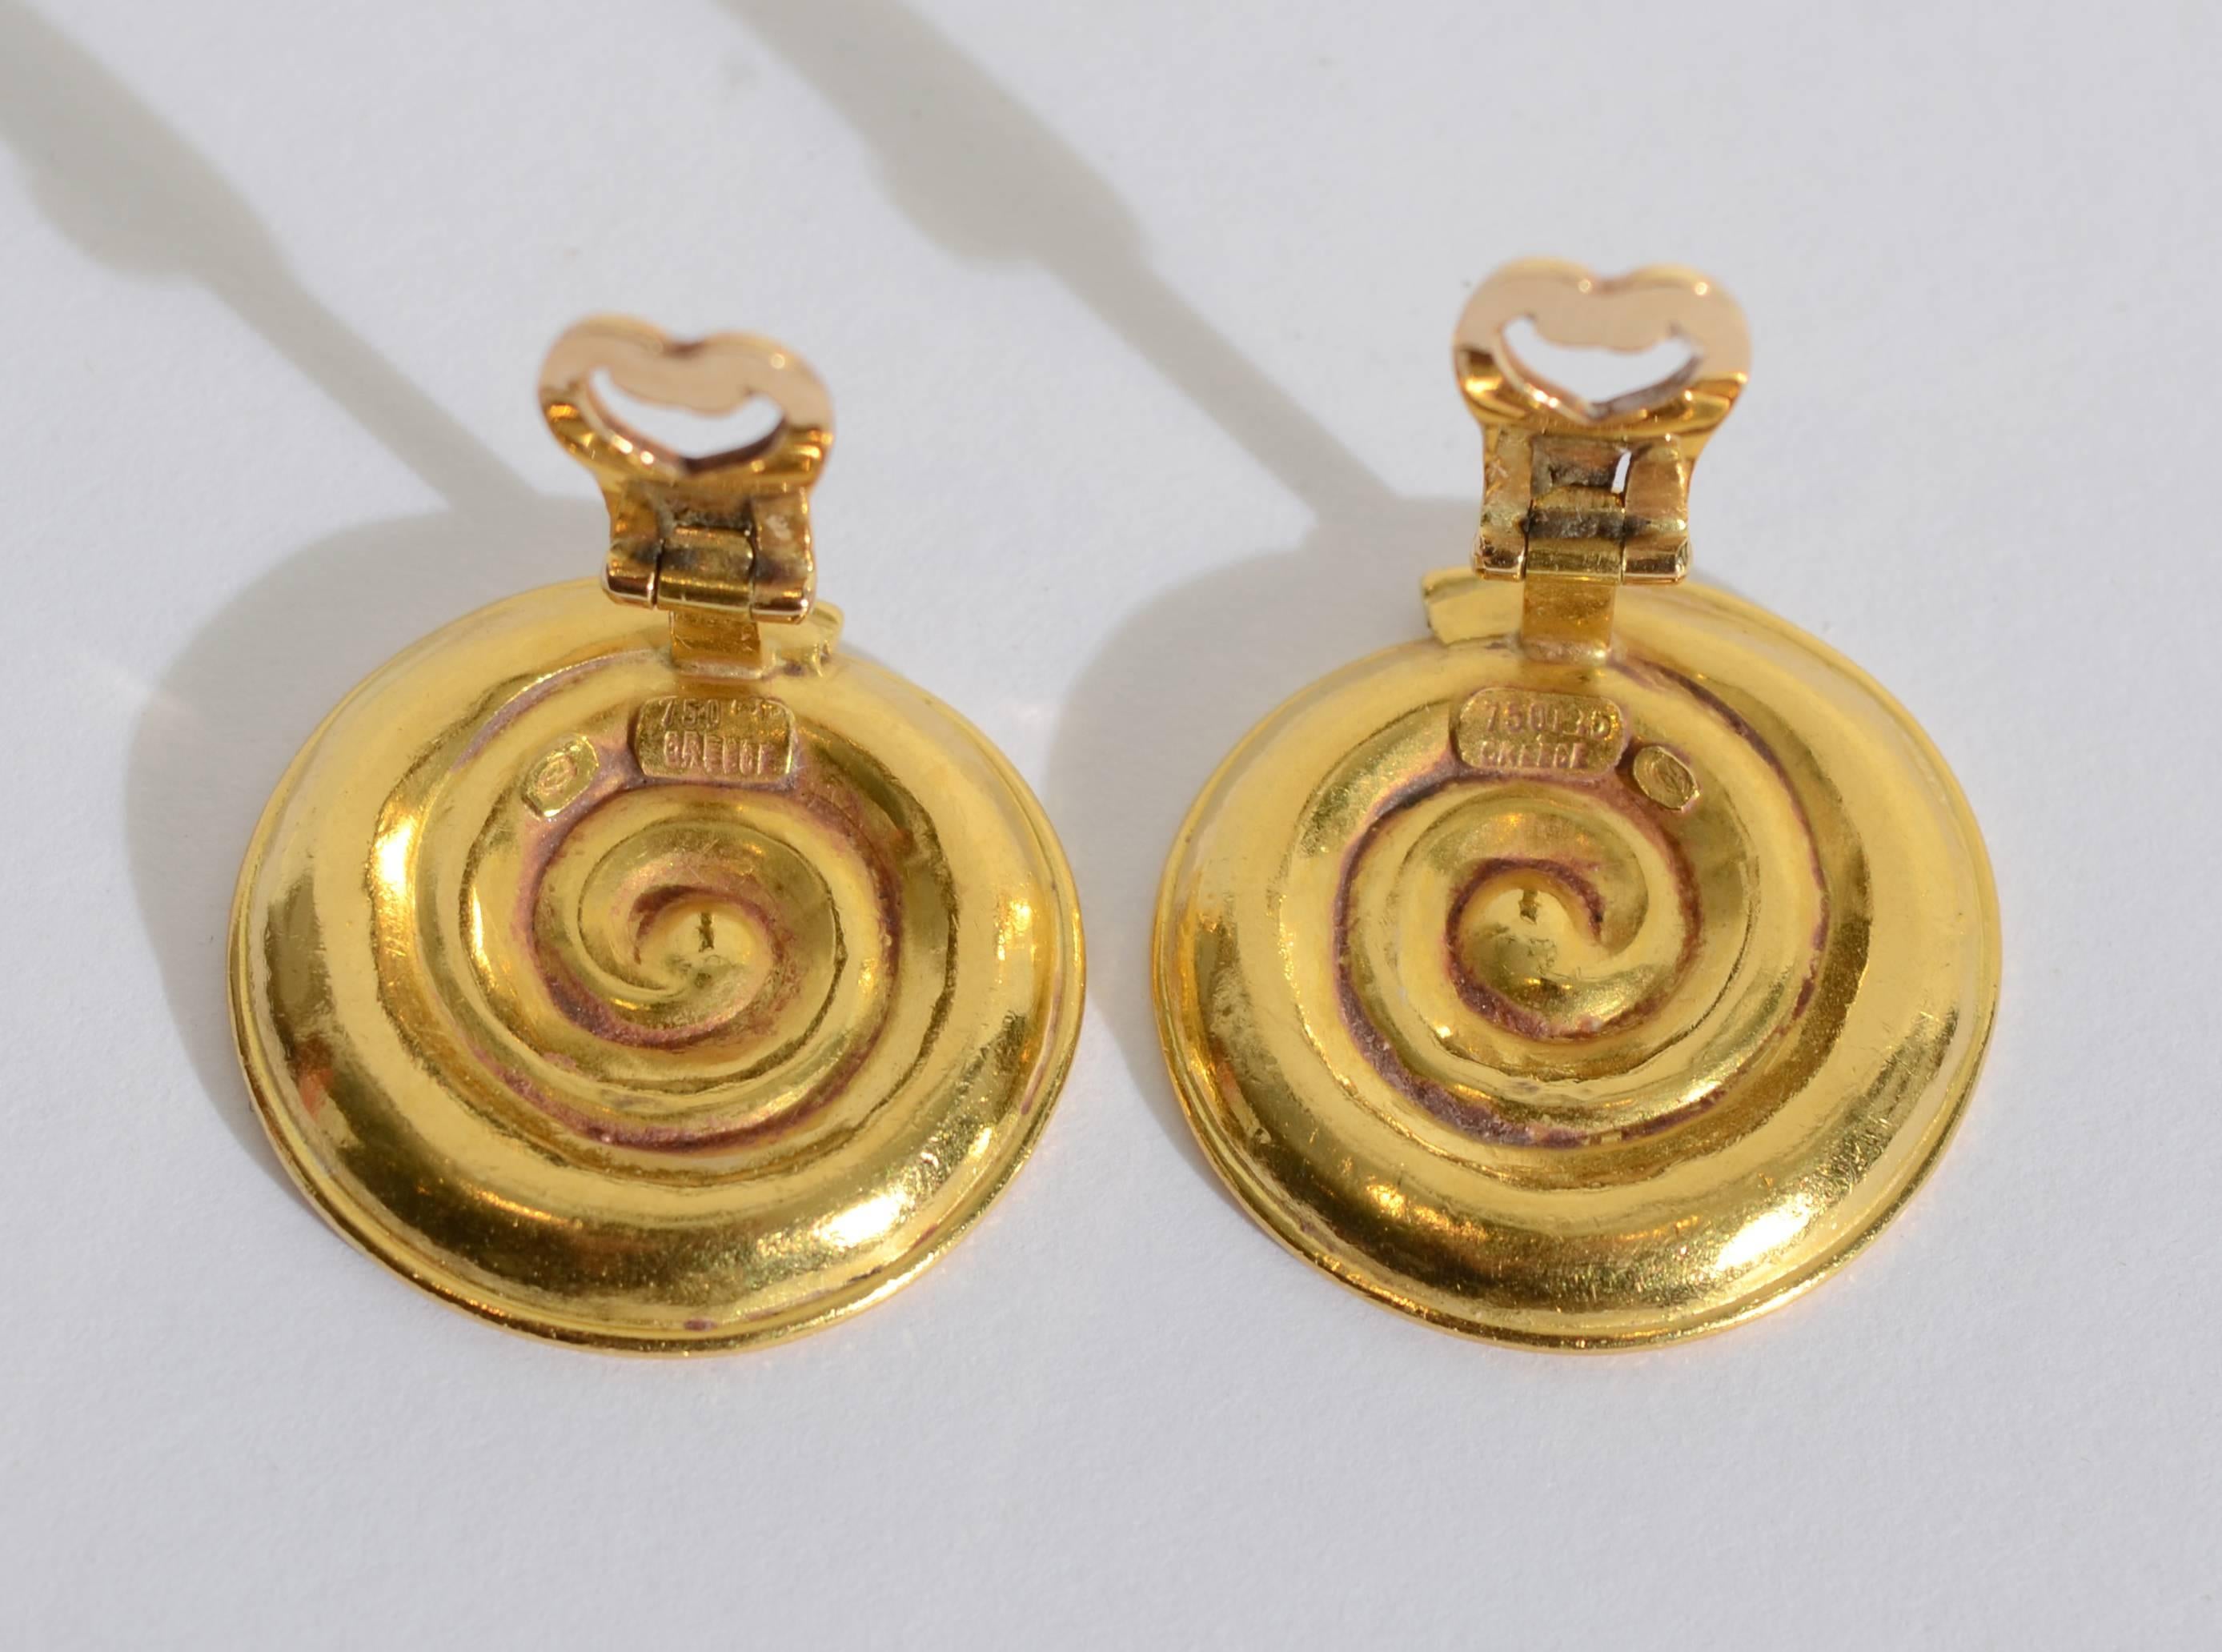 Coiled disc ear clips by Greece's most admired jeweler, Ilias laLaounis. The bi-level coiled pattern is timeless in design  as much of laLaounis's work reflects his ancient heritage. They clips are 1 inch in diameter. Clips can easily be converted